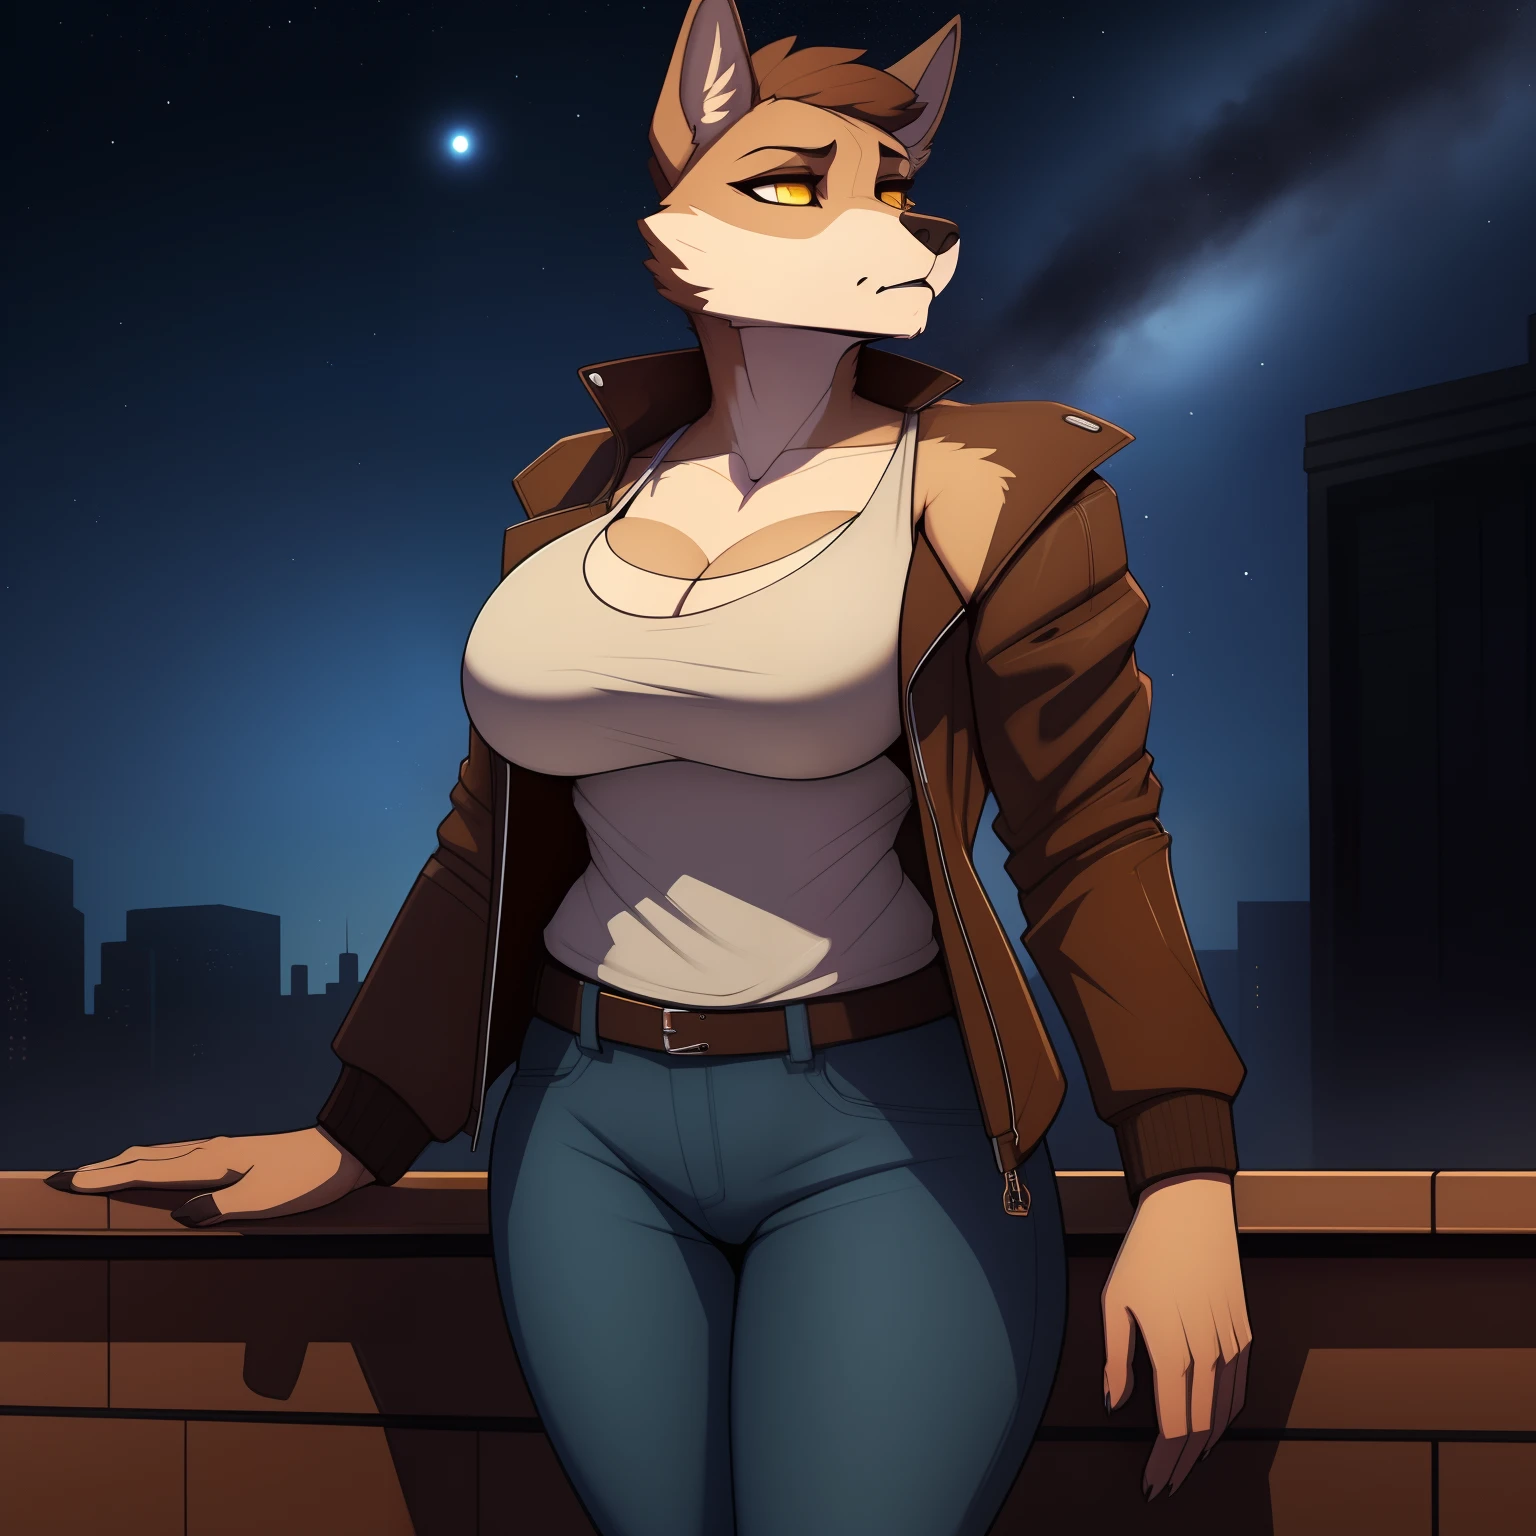 Tall_lanky_mature_wolf full_breasts female brown_two-toned_furry_body yellow_eyes jacket tank_top disheveled exhausted jeans misty_breath starry_sky solo Masterpiece best_quality absurdres highly_detailed cleanly_drawn_eyes anthro_only by_claweddrip, by_greasymojo, by_underscore-b, by_runawaystride